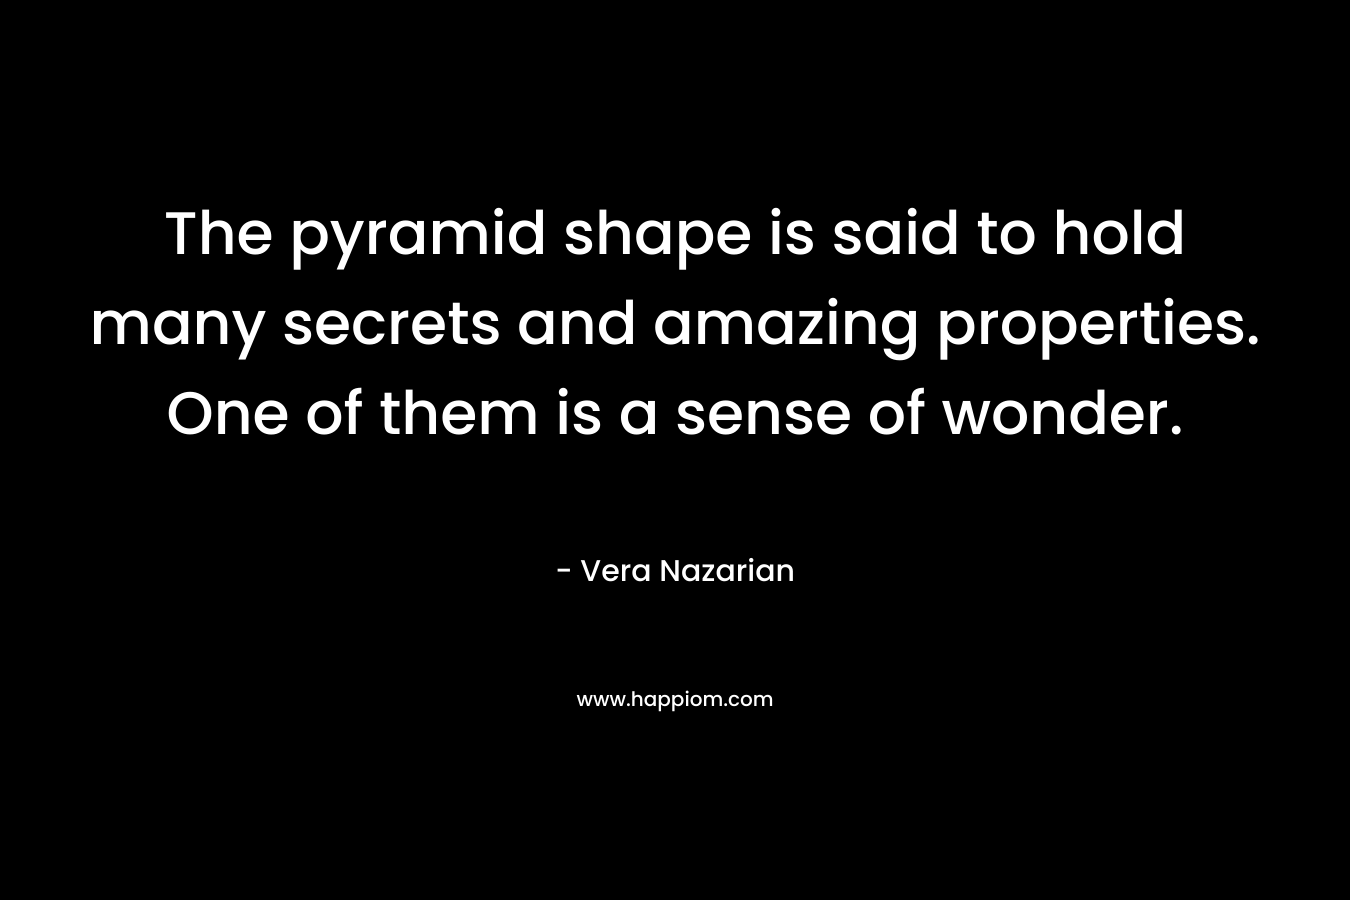 The pyramid shape is said to hold many secrets and amazing properties. One of them is a sense of wonder. – Vera Nazarian